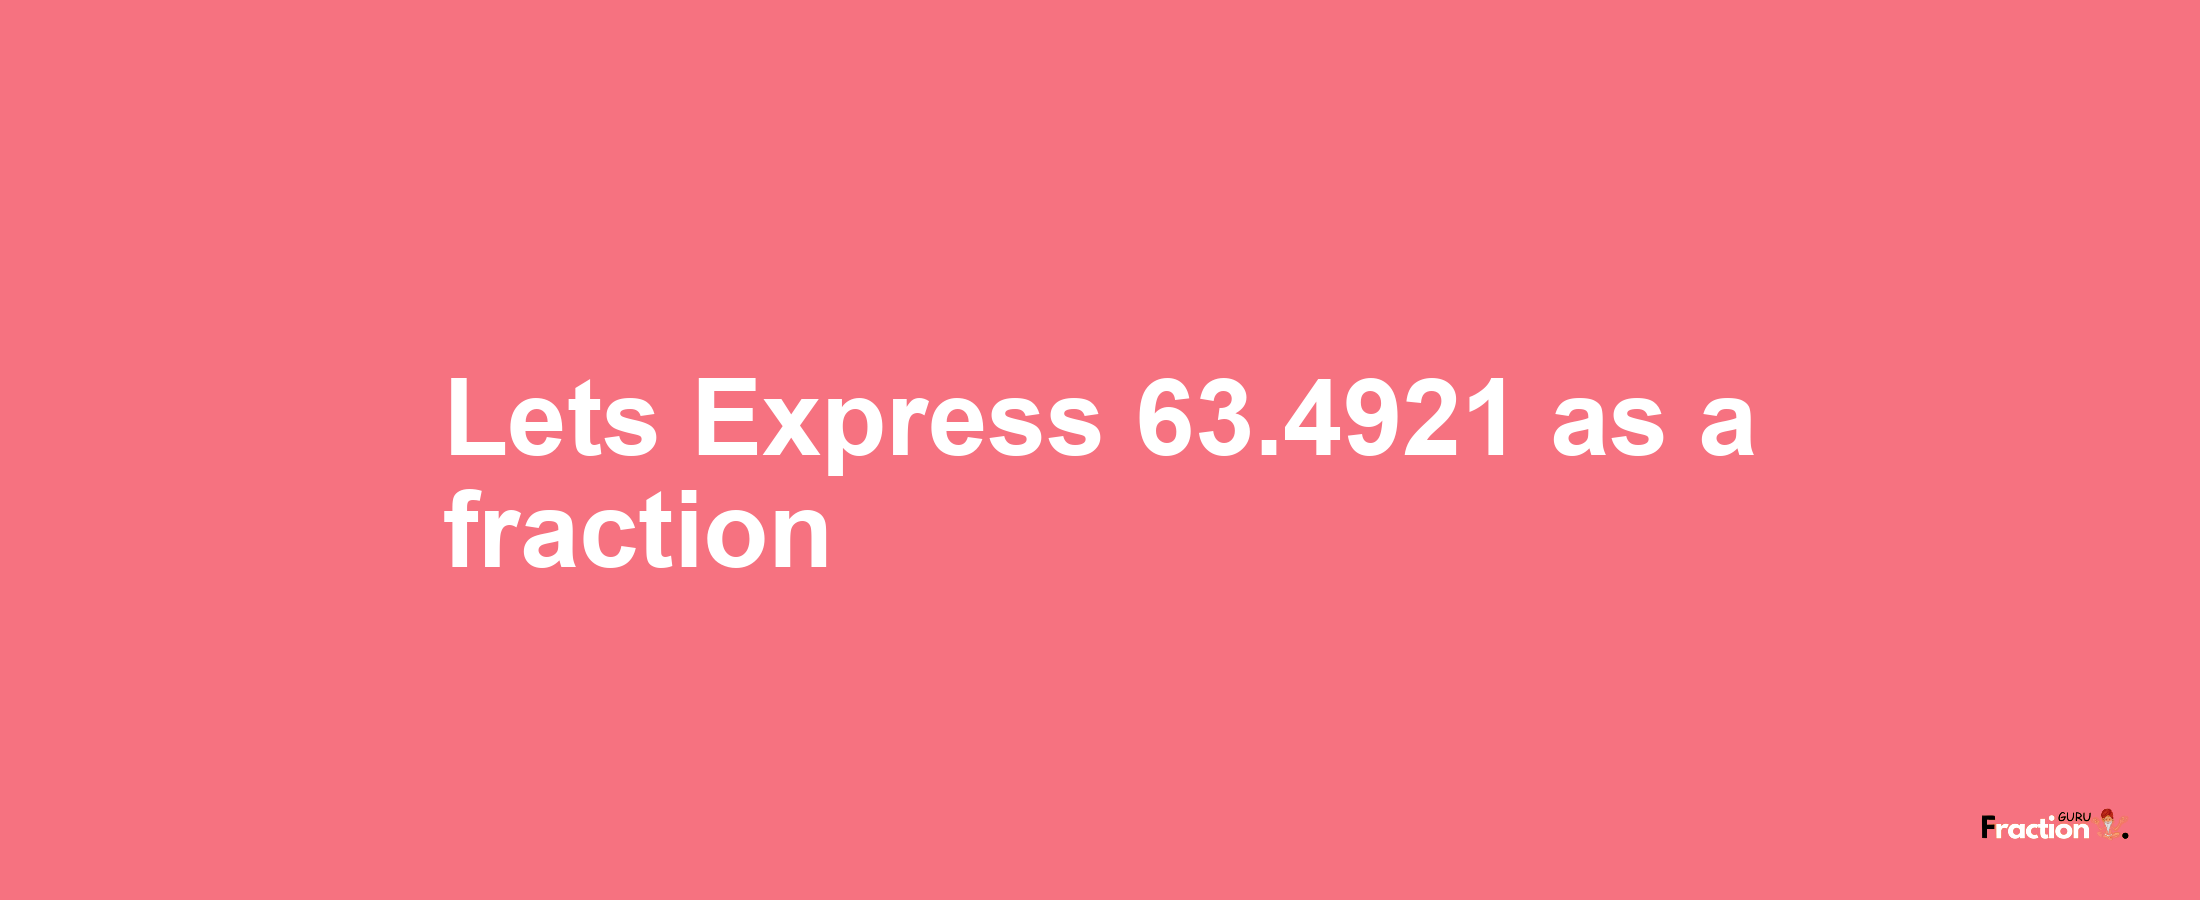 Lets Express 63.4921 as afraction